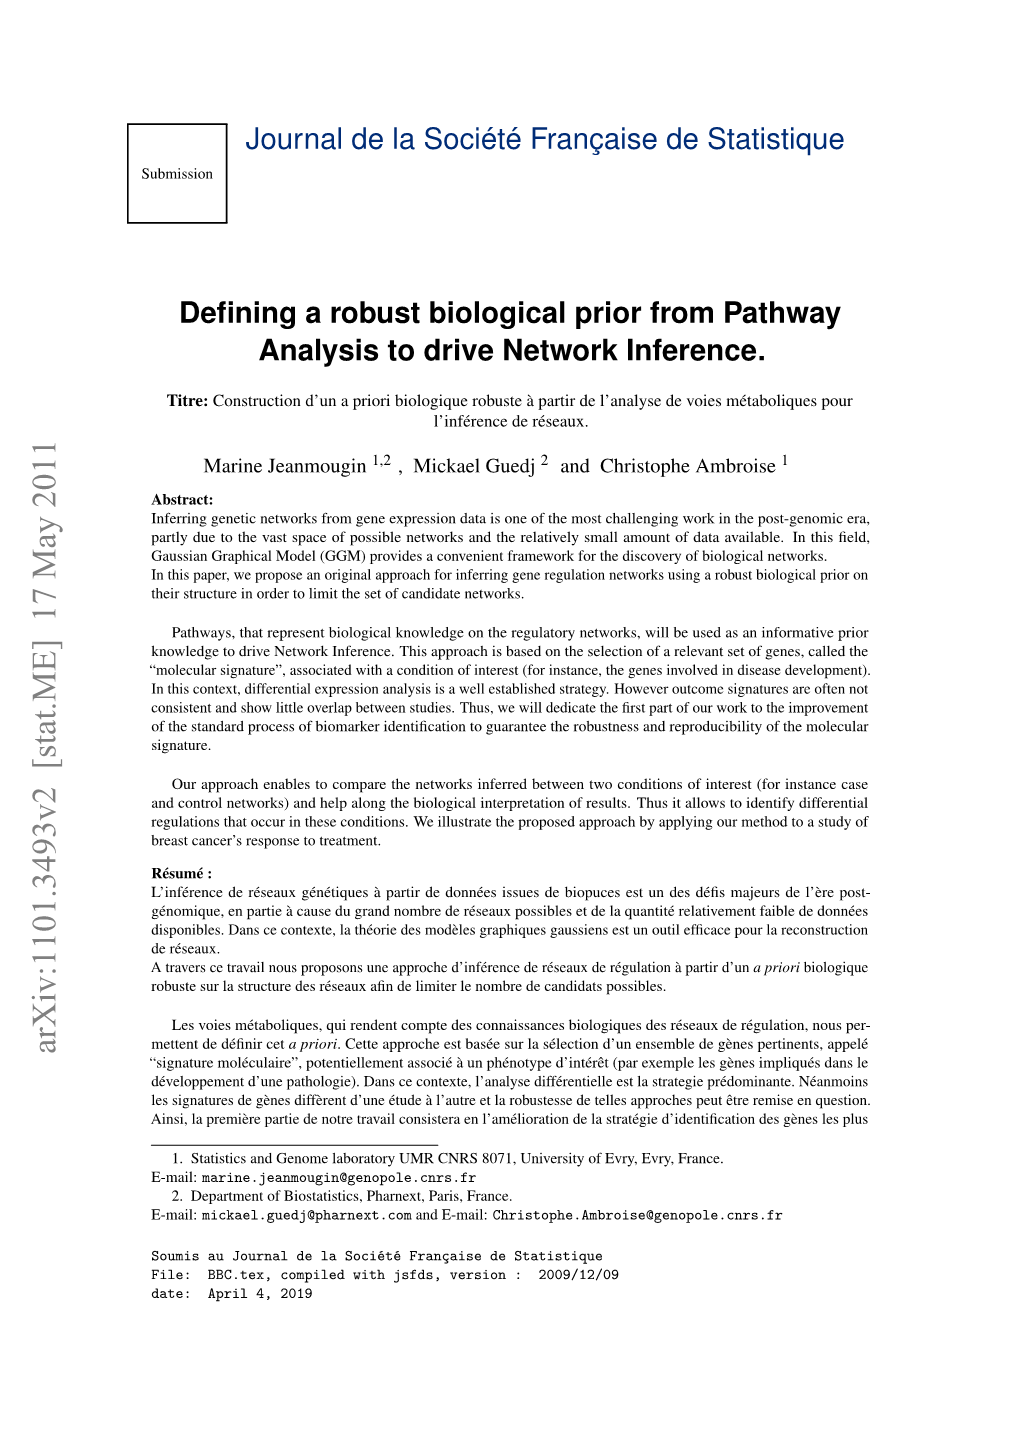 Defining a Robust Biological Prior from Pathway Analysis to Drive Network